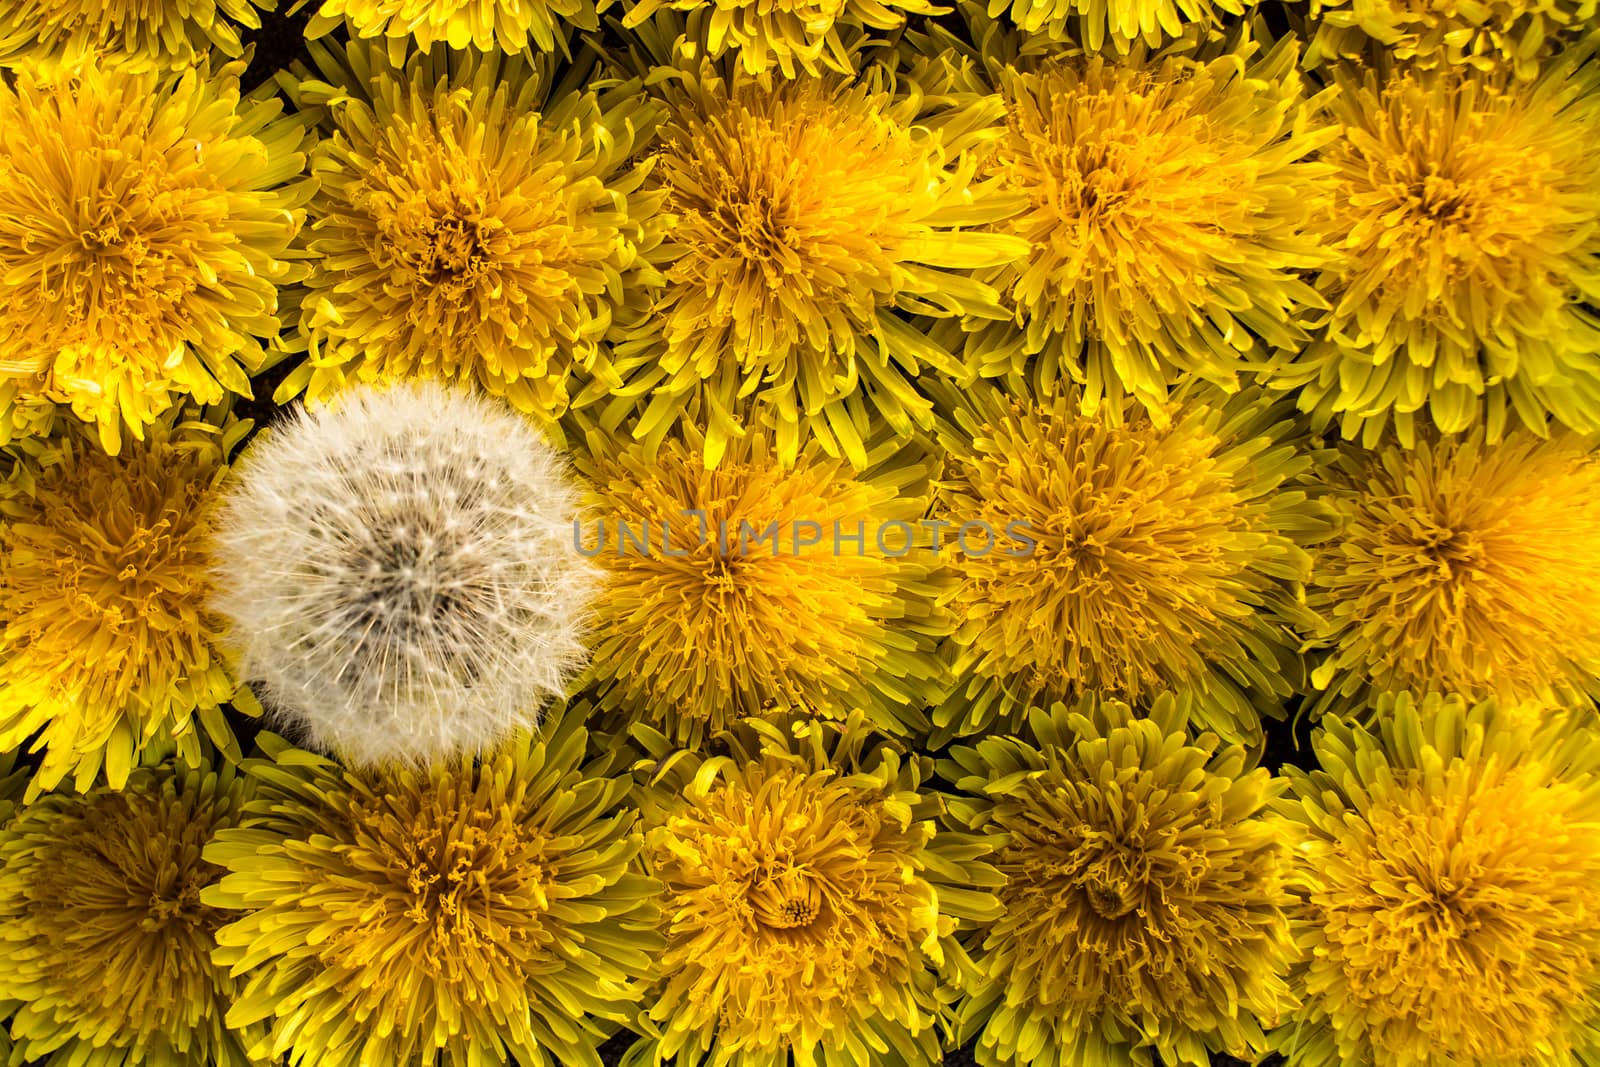 Natural bright and colorful yellow and white dandelions texture background.